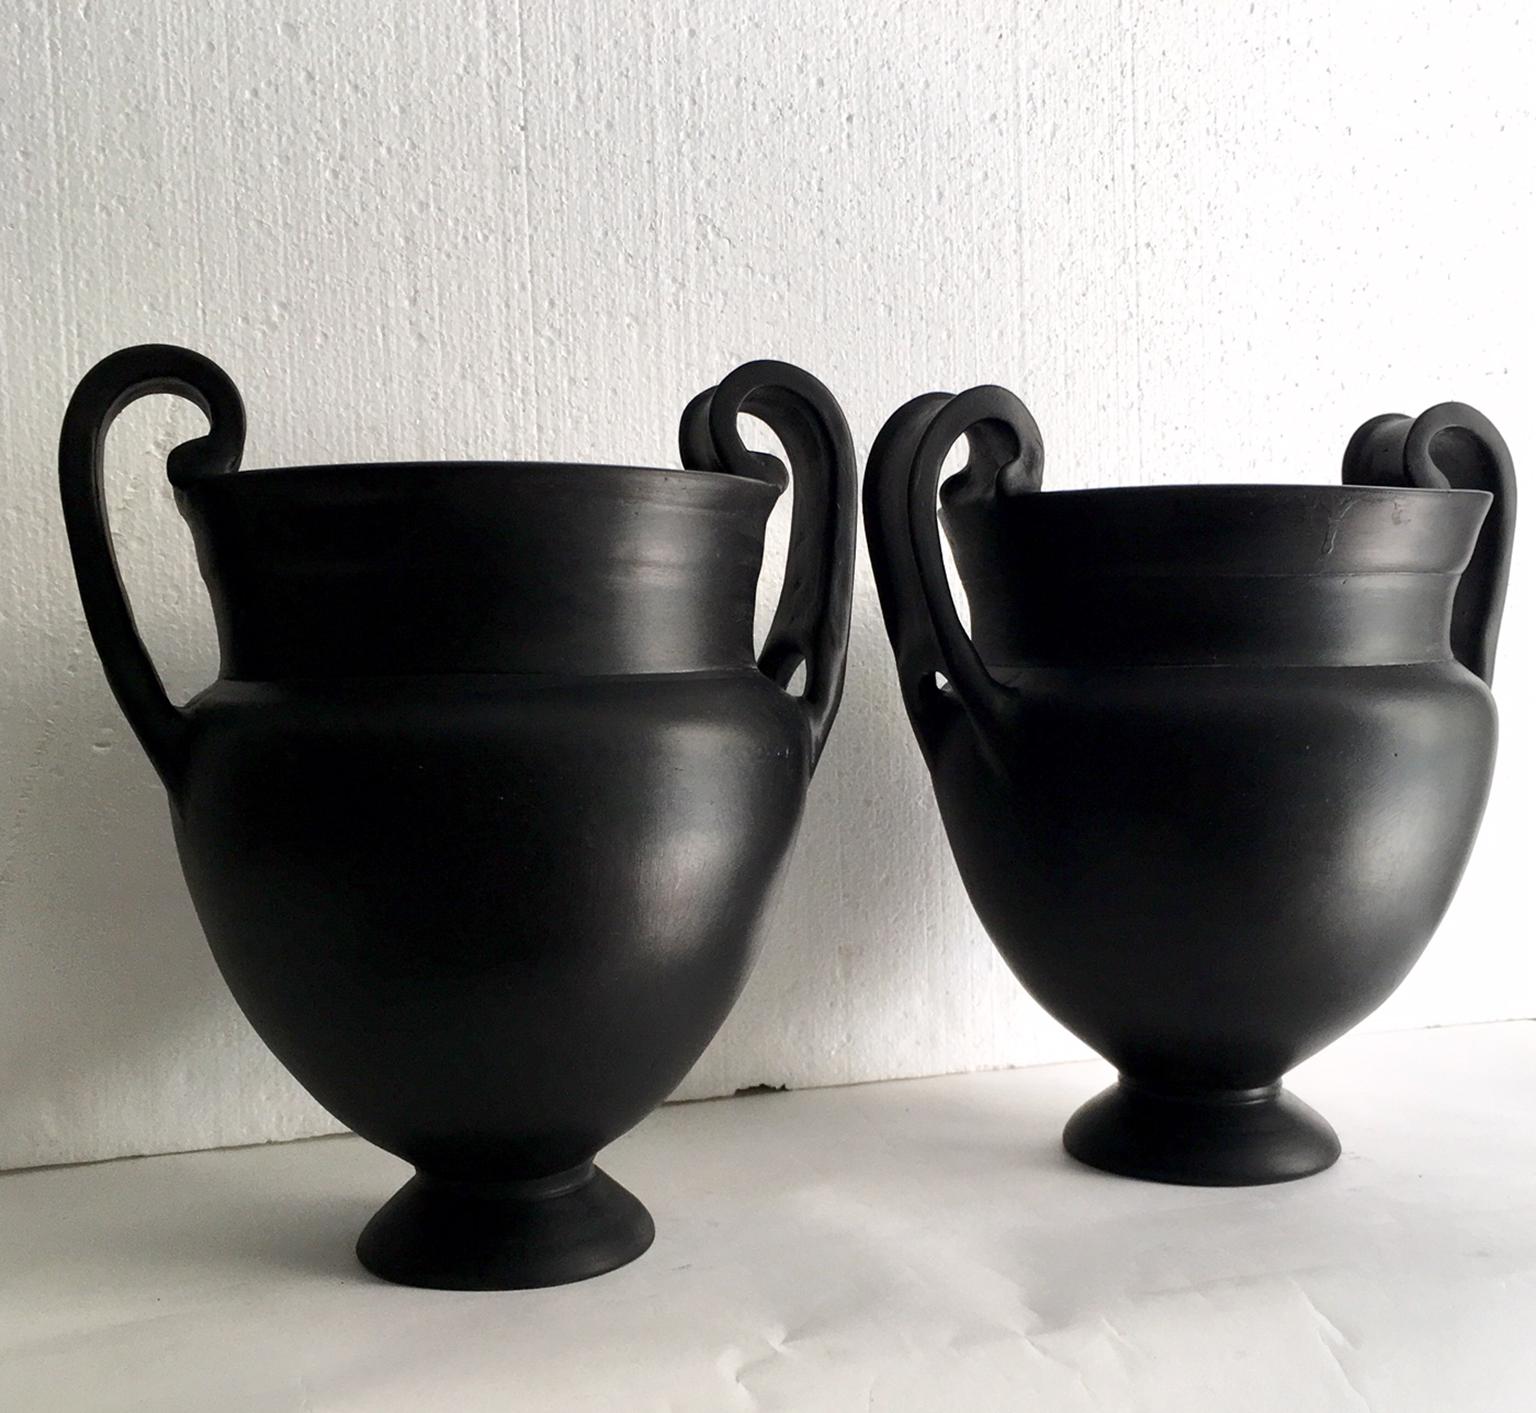 Pair of vases in the ancient Greece style, in black terracotta.